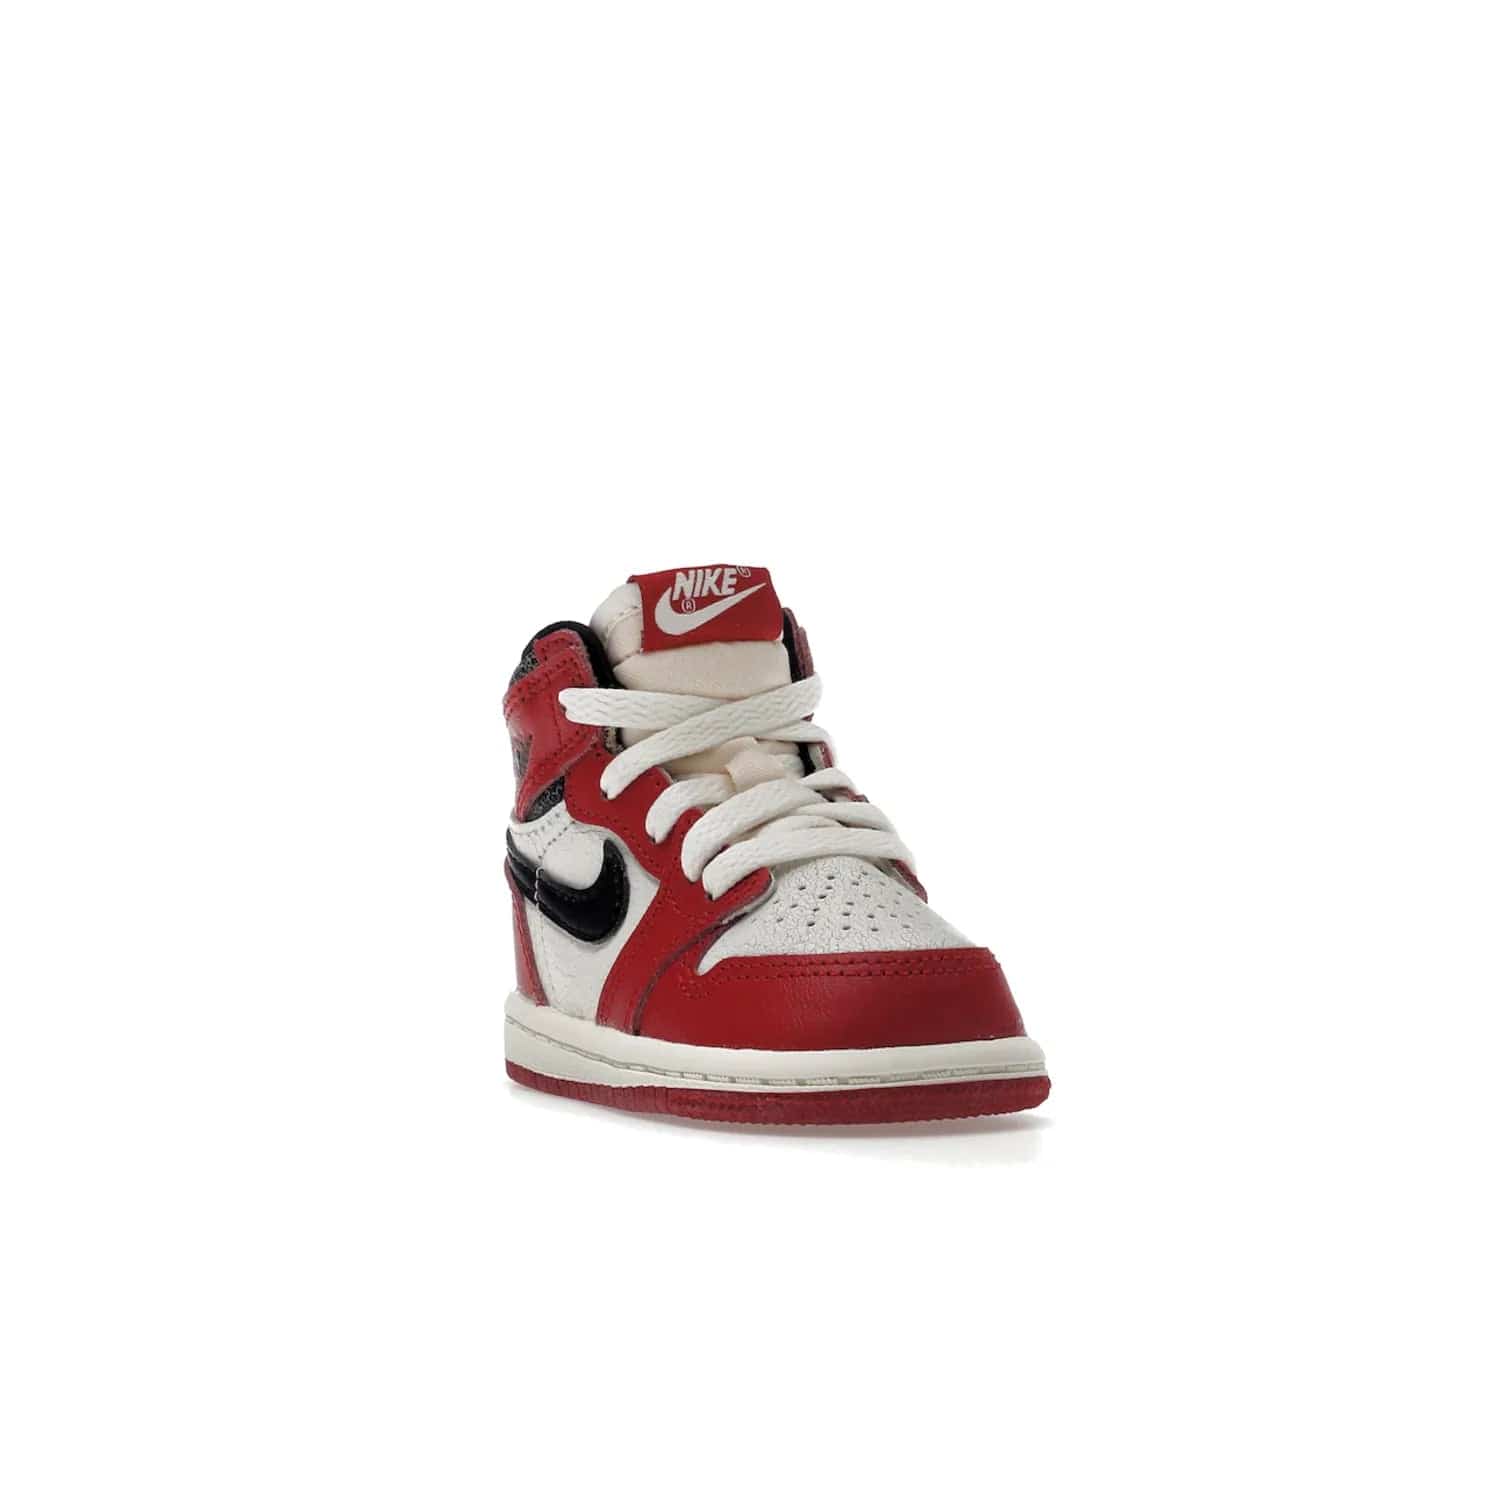 Jordan 1 Retro High OG Chicago Lost and Found (TD) - Image 7 - Only at www.BallersClubKickz.com - Introducing the Air Jordan 1 Retro High OG Lost and Found TD – a vibrant combination of 4 colors: muslin, varsity, sail and black. Featuring a crackled leather upper and AIR units for comfort and a signature Wings logo, these retro shoes add comfort and style for your little ones at $70. Get your pair before 19th December 2022!